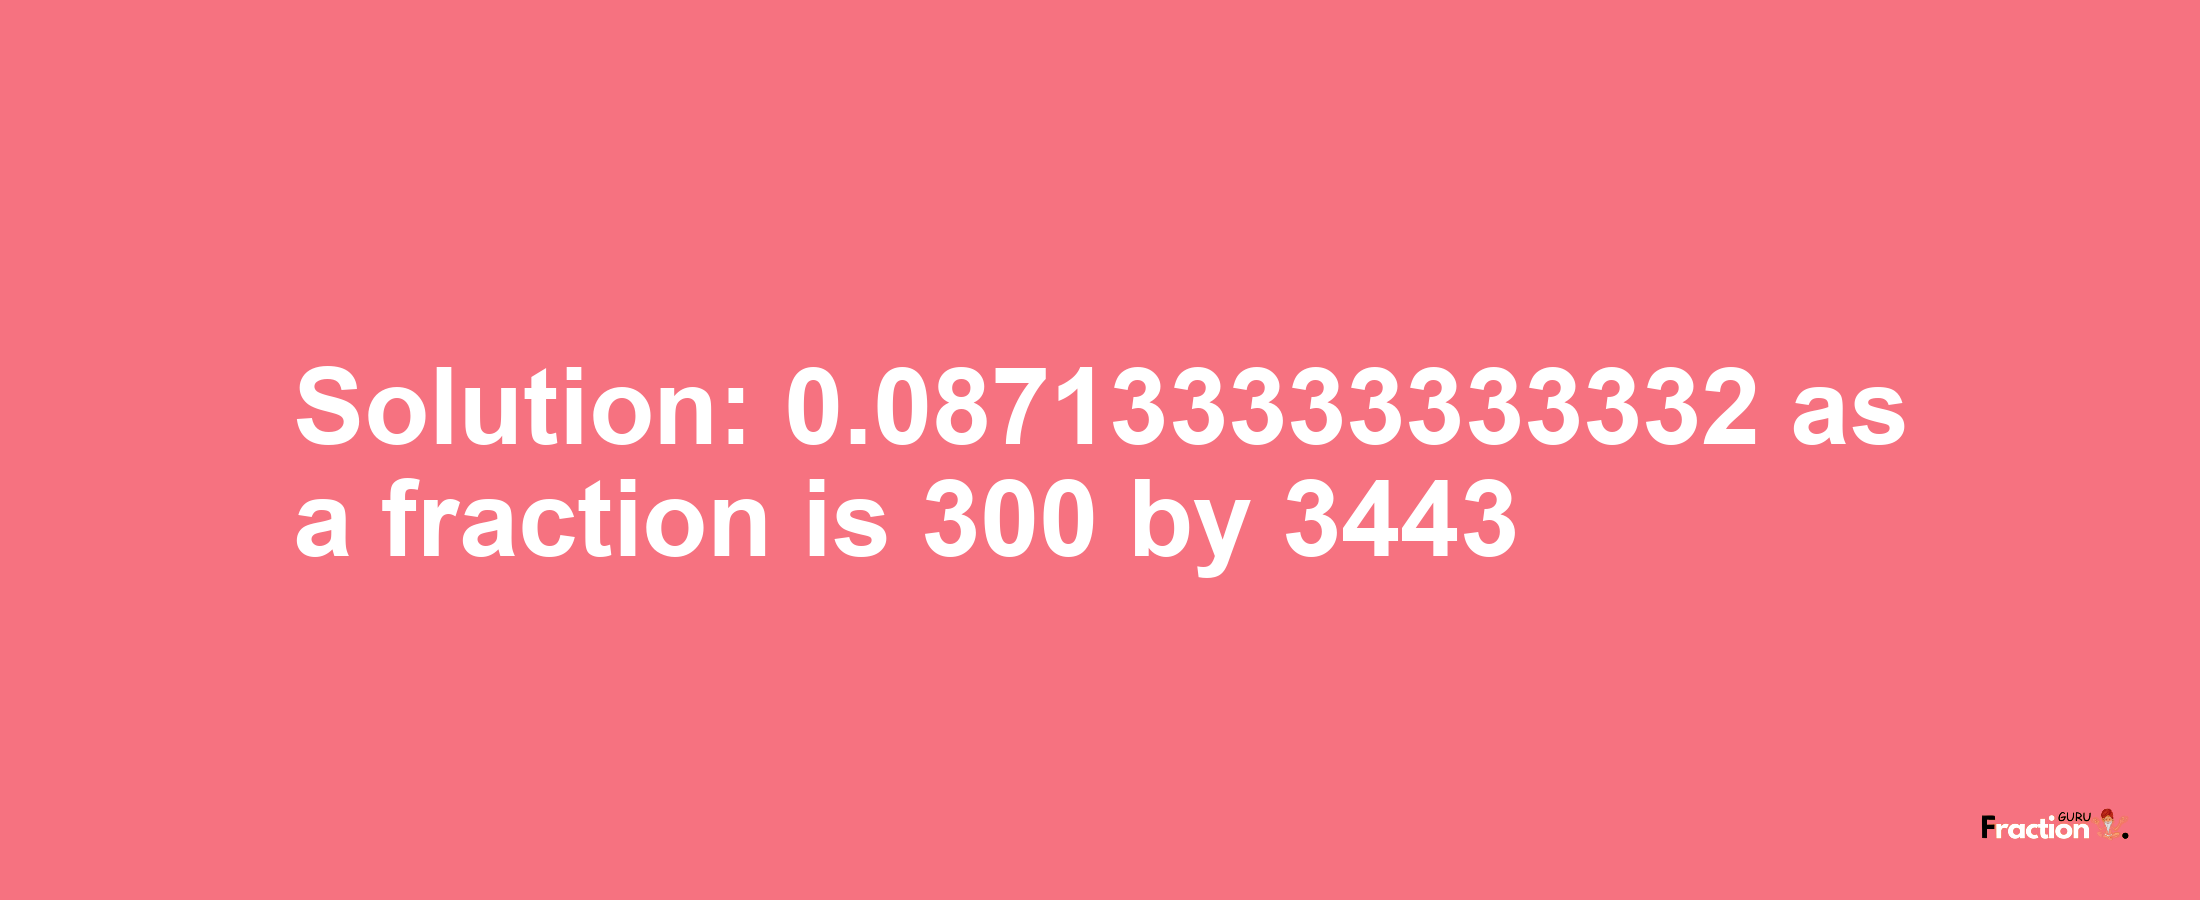 Solution:0.087133333333332 as a fraction is 300/3443